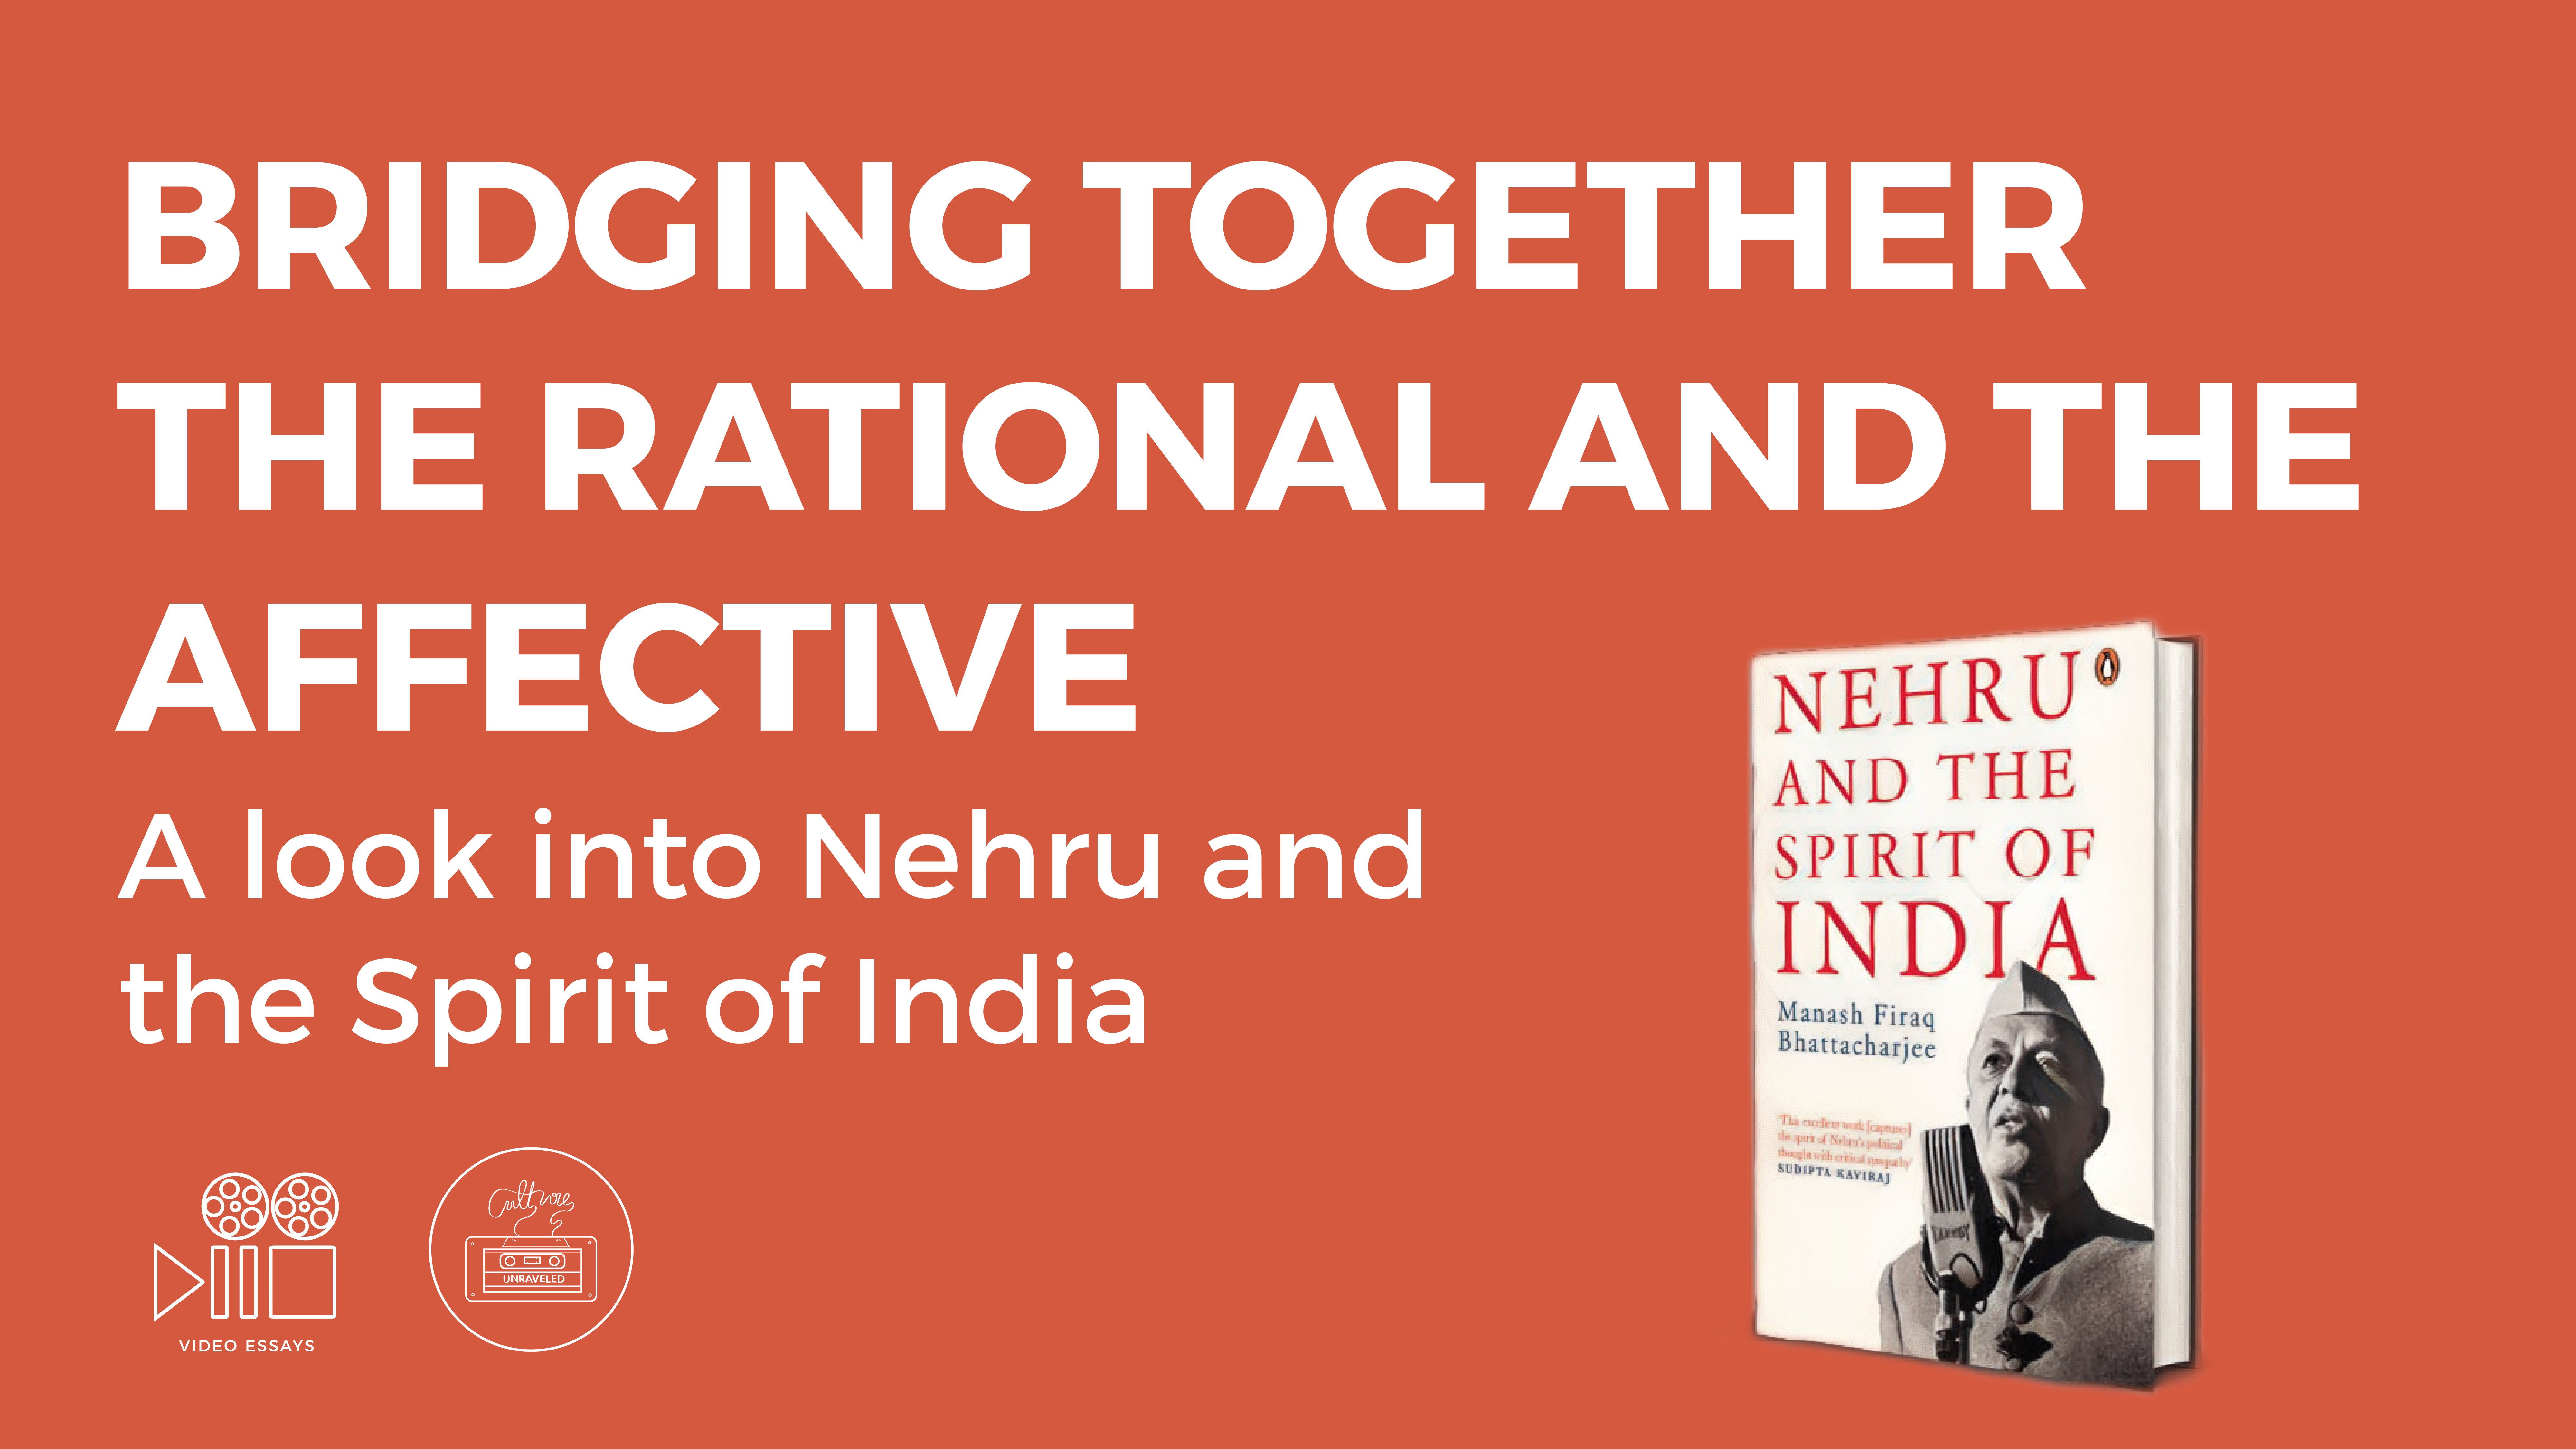 Bridging together the Rational and the Affective. A Look into Nehru and the Spirit of India